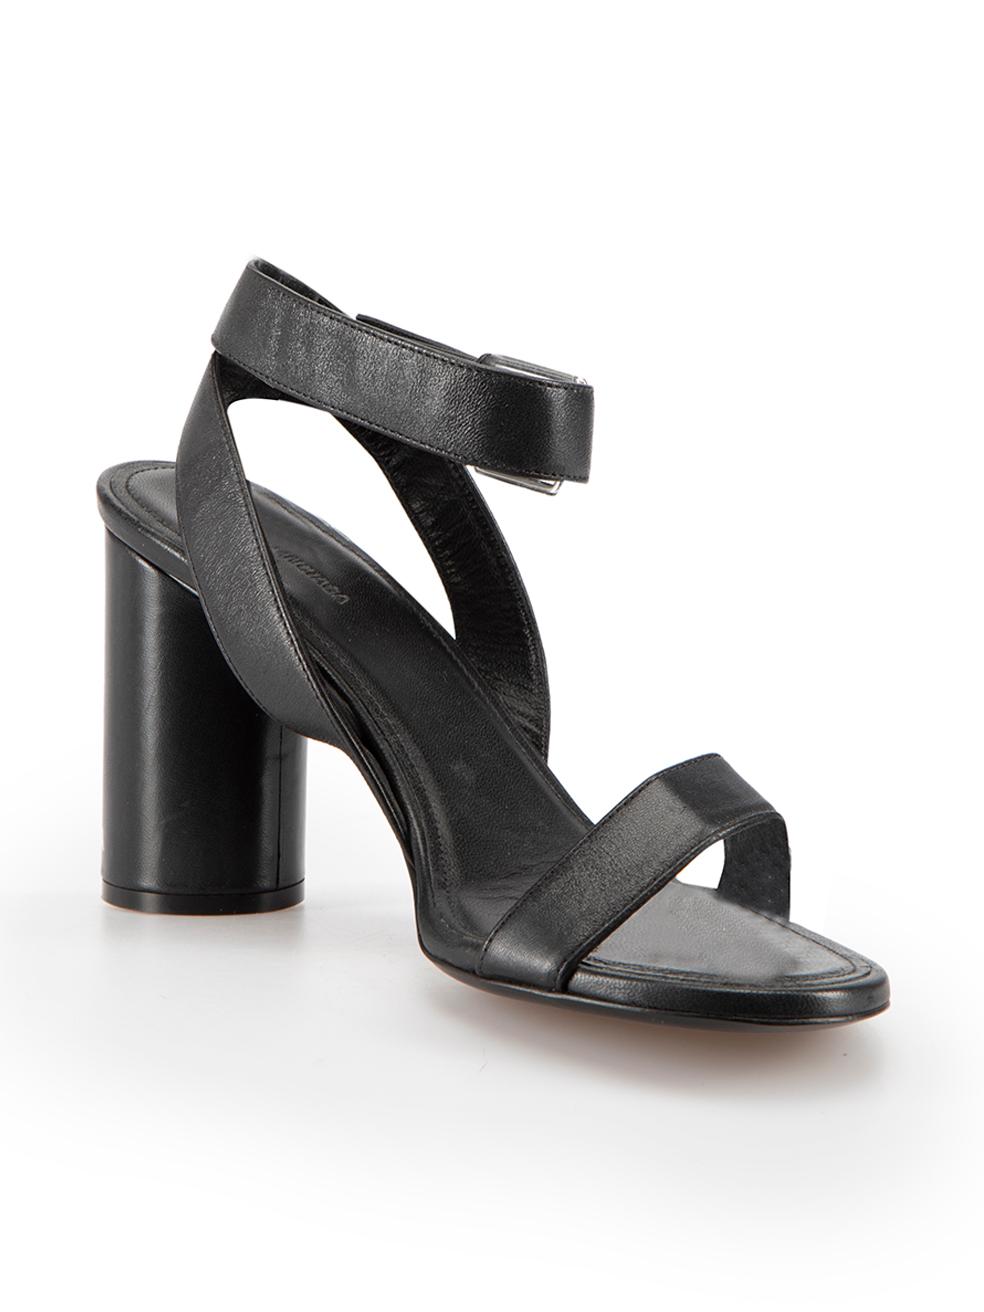 CONDITION is Very good. Minimal wear to sandals is evident. Minimal wear to both heels with very light indents to the leather on this used Balenciaga designer resale item.



Details


Black

Leather

Heeled sandals

Strappy

Wrap around adjustable